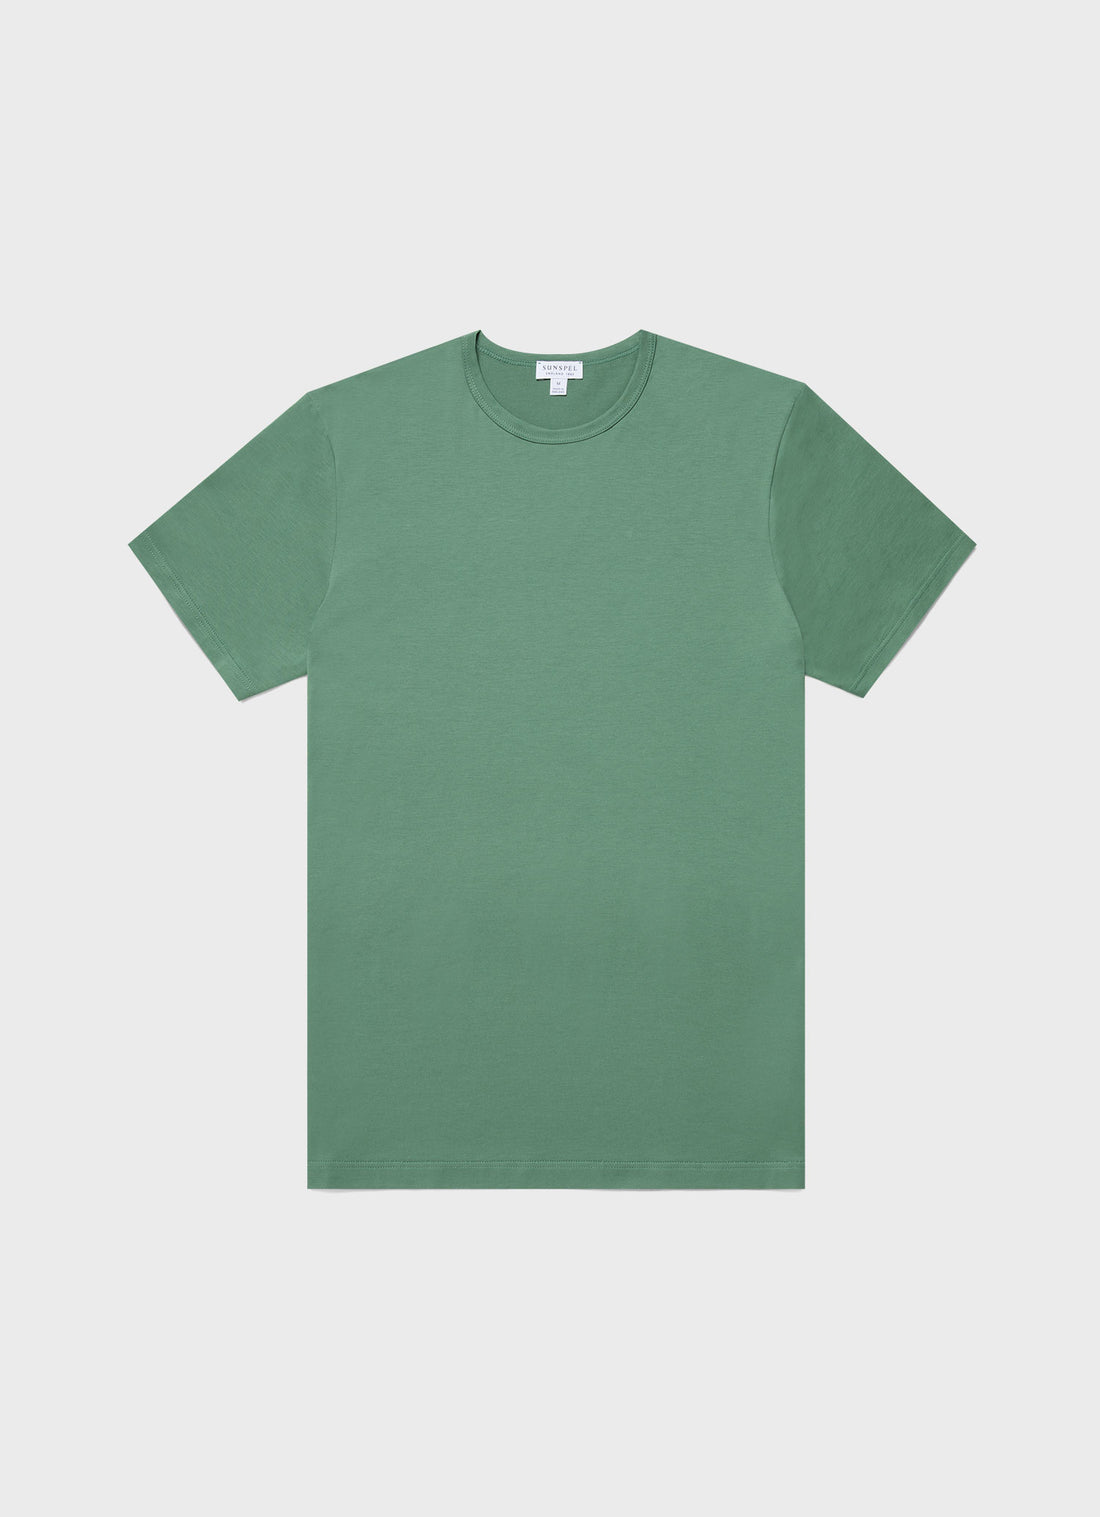 Men's Classic T-shirt in Thyme